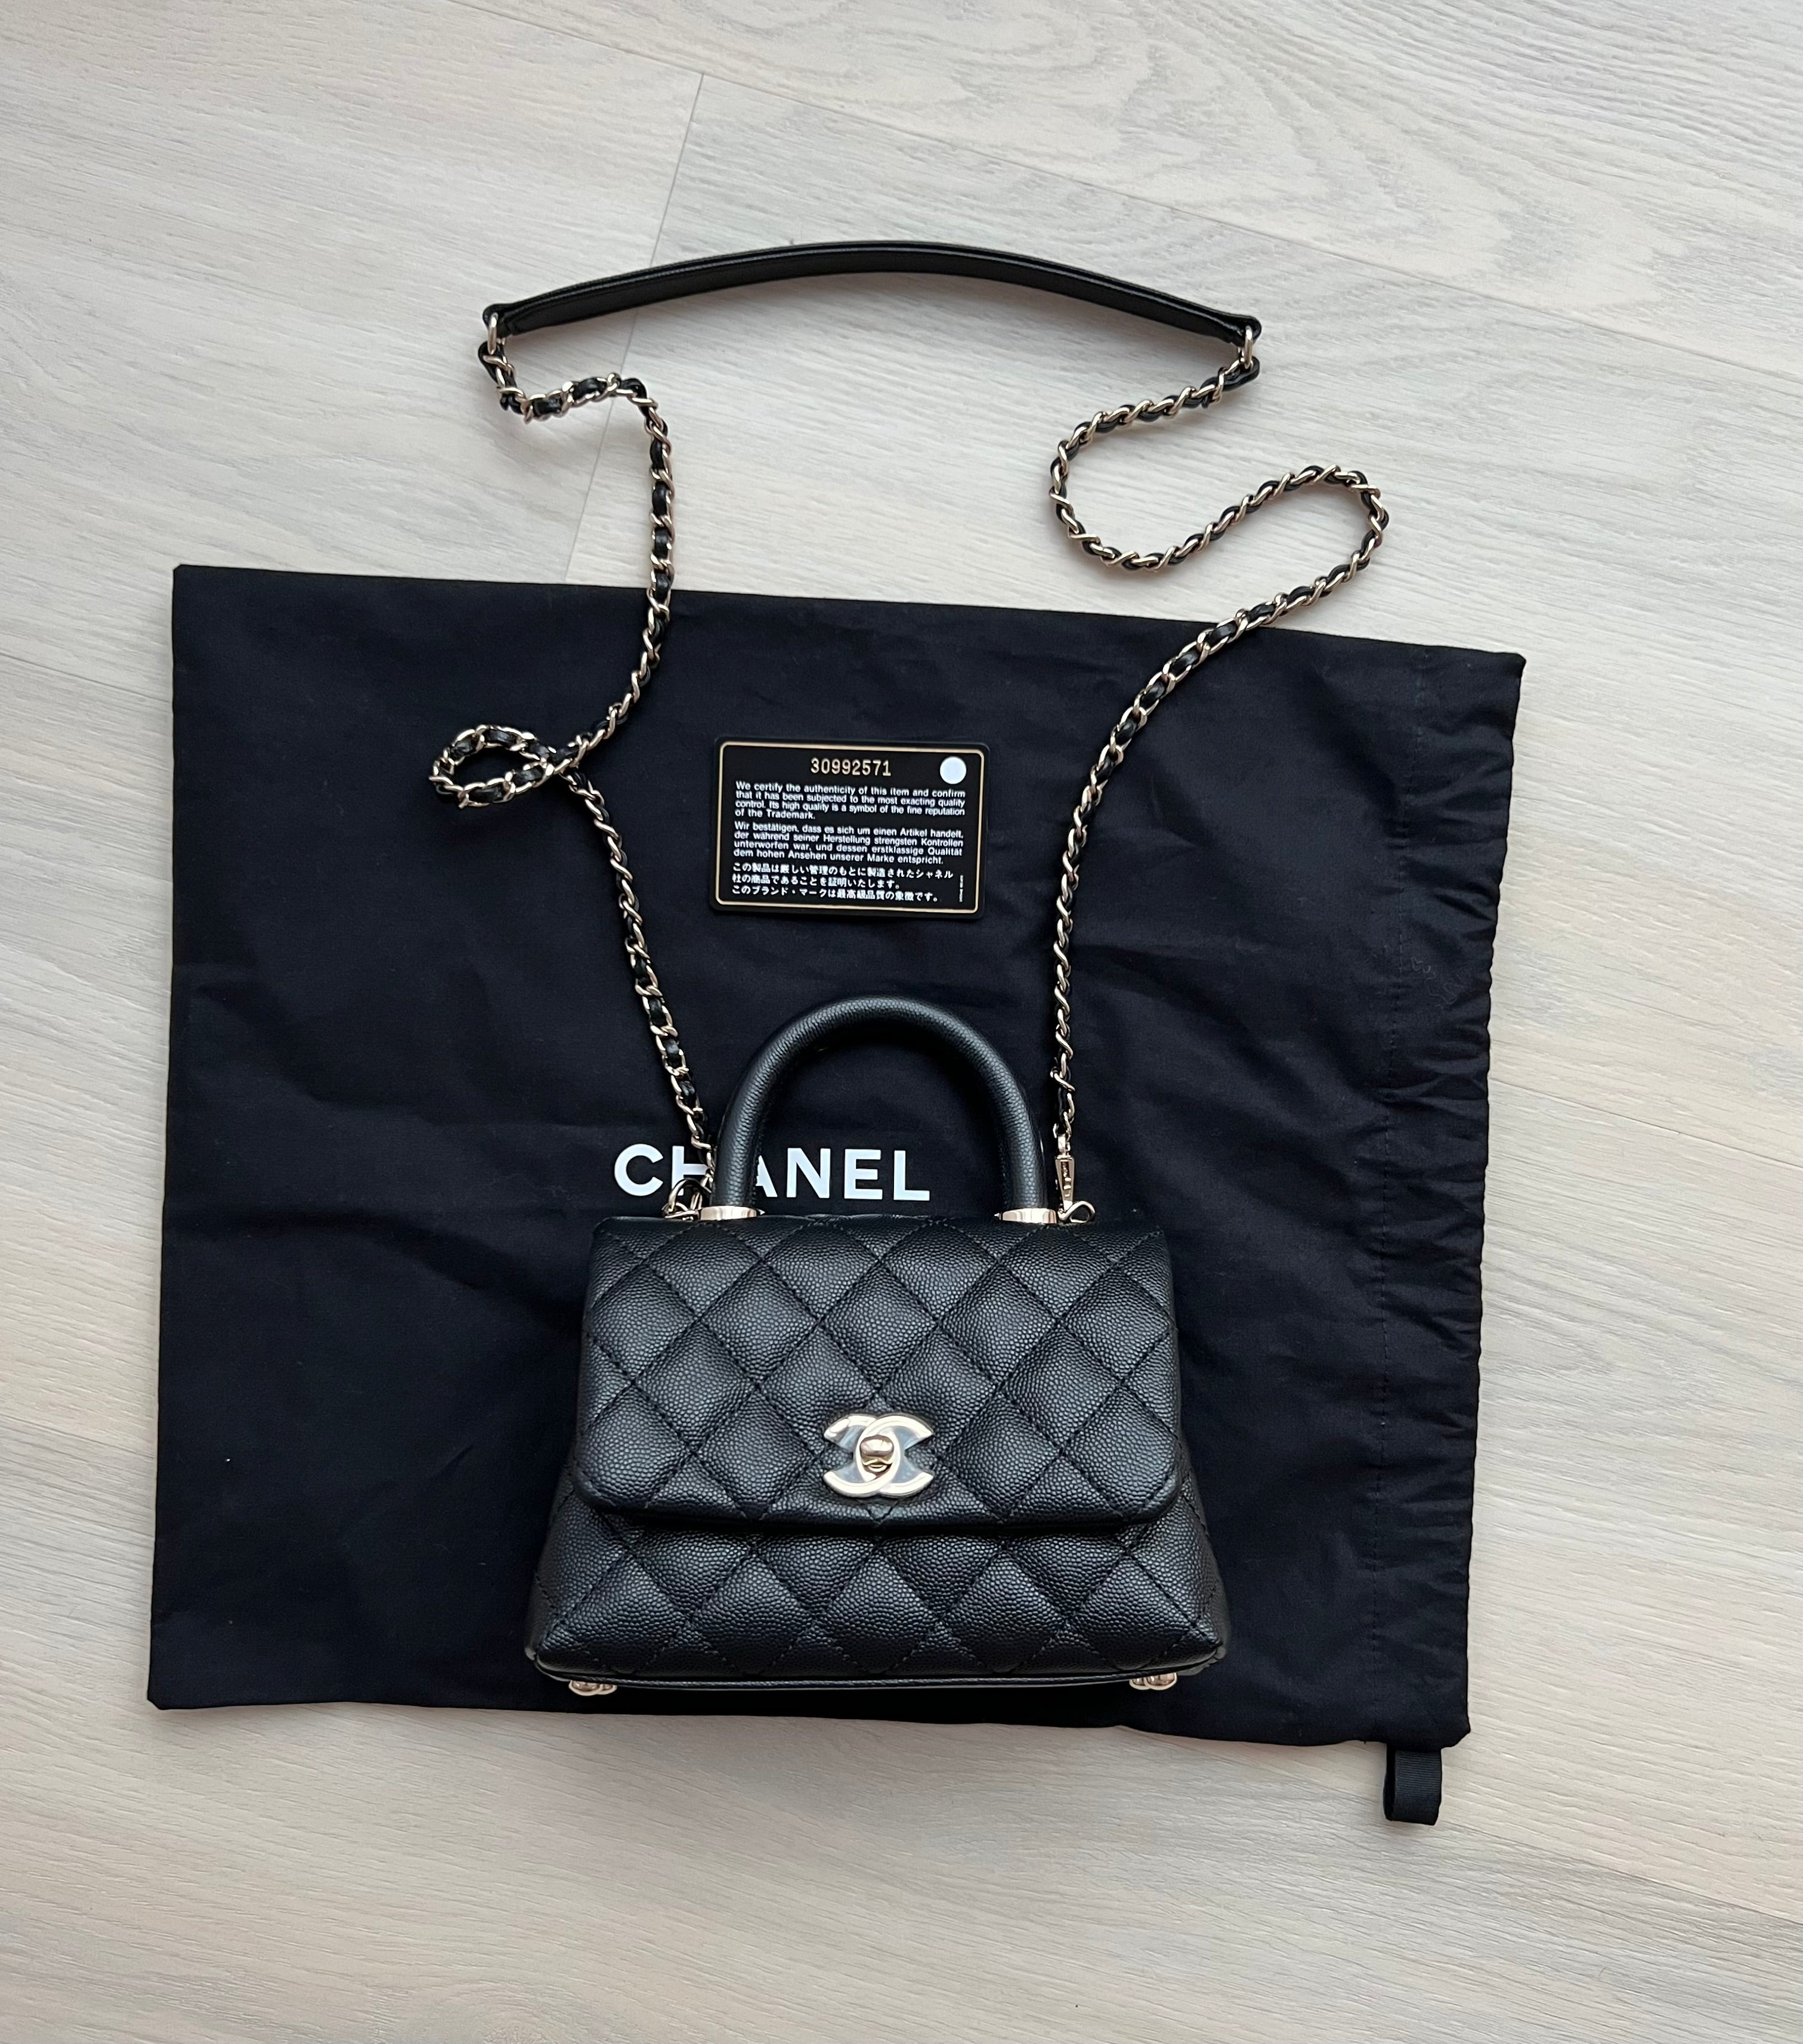 Chanel Black Quilted Caviar Leather Small Coco Top Handle Bag Chanel